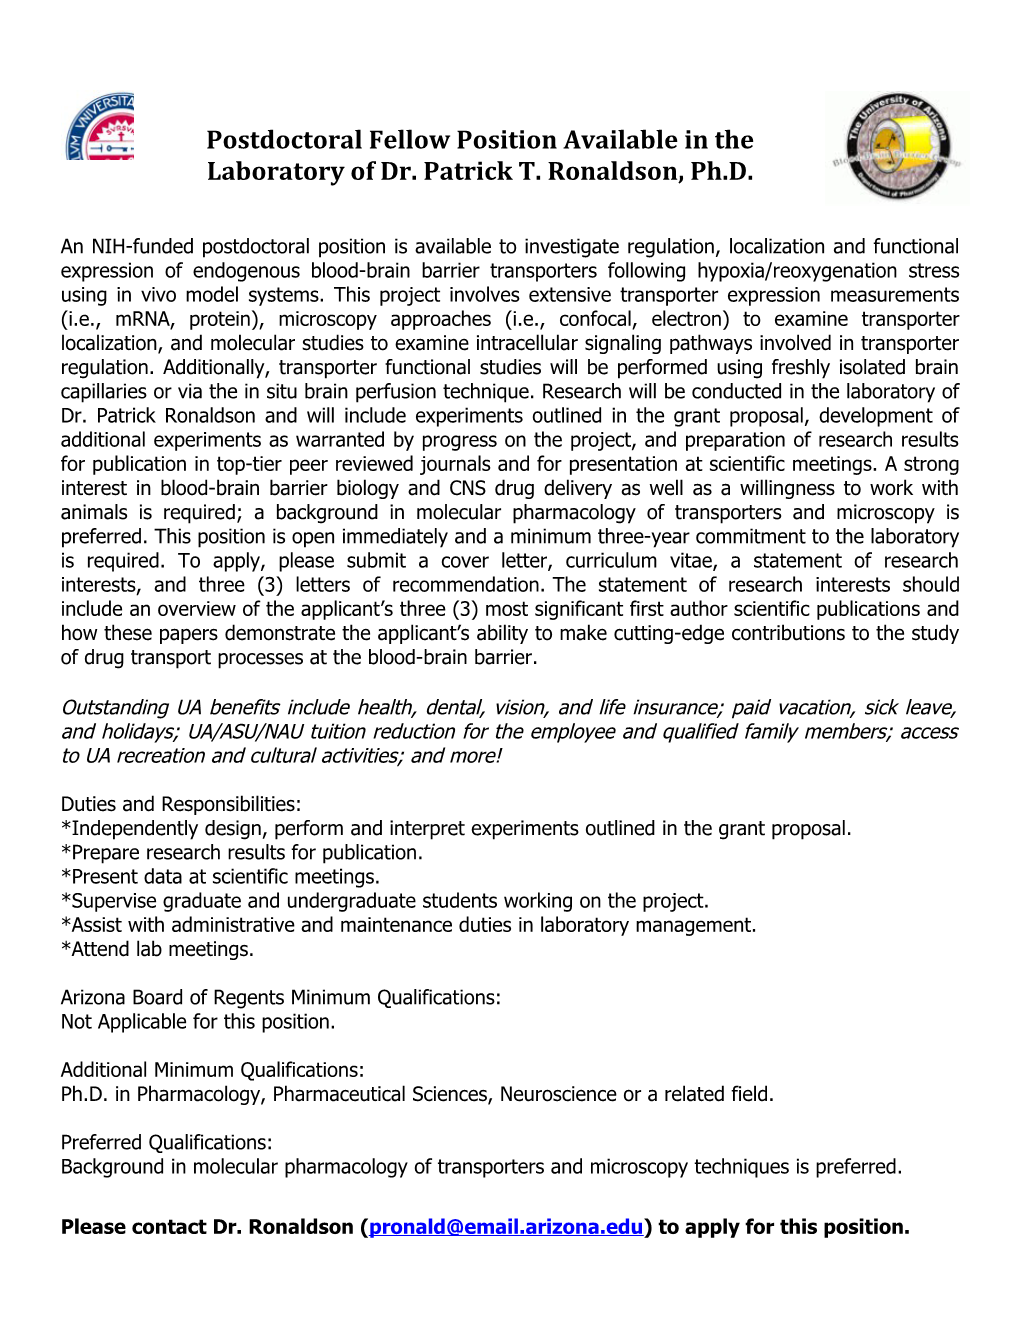 Postdoctoral Fellow Position Available in The